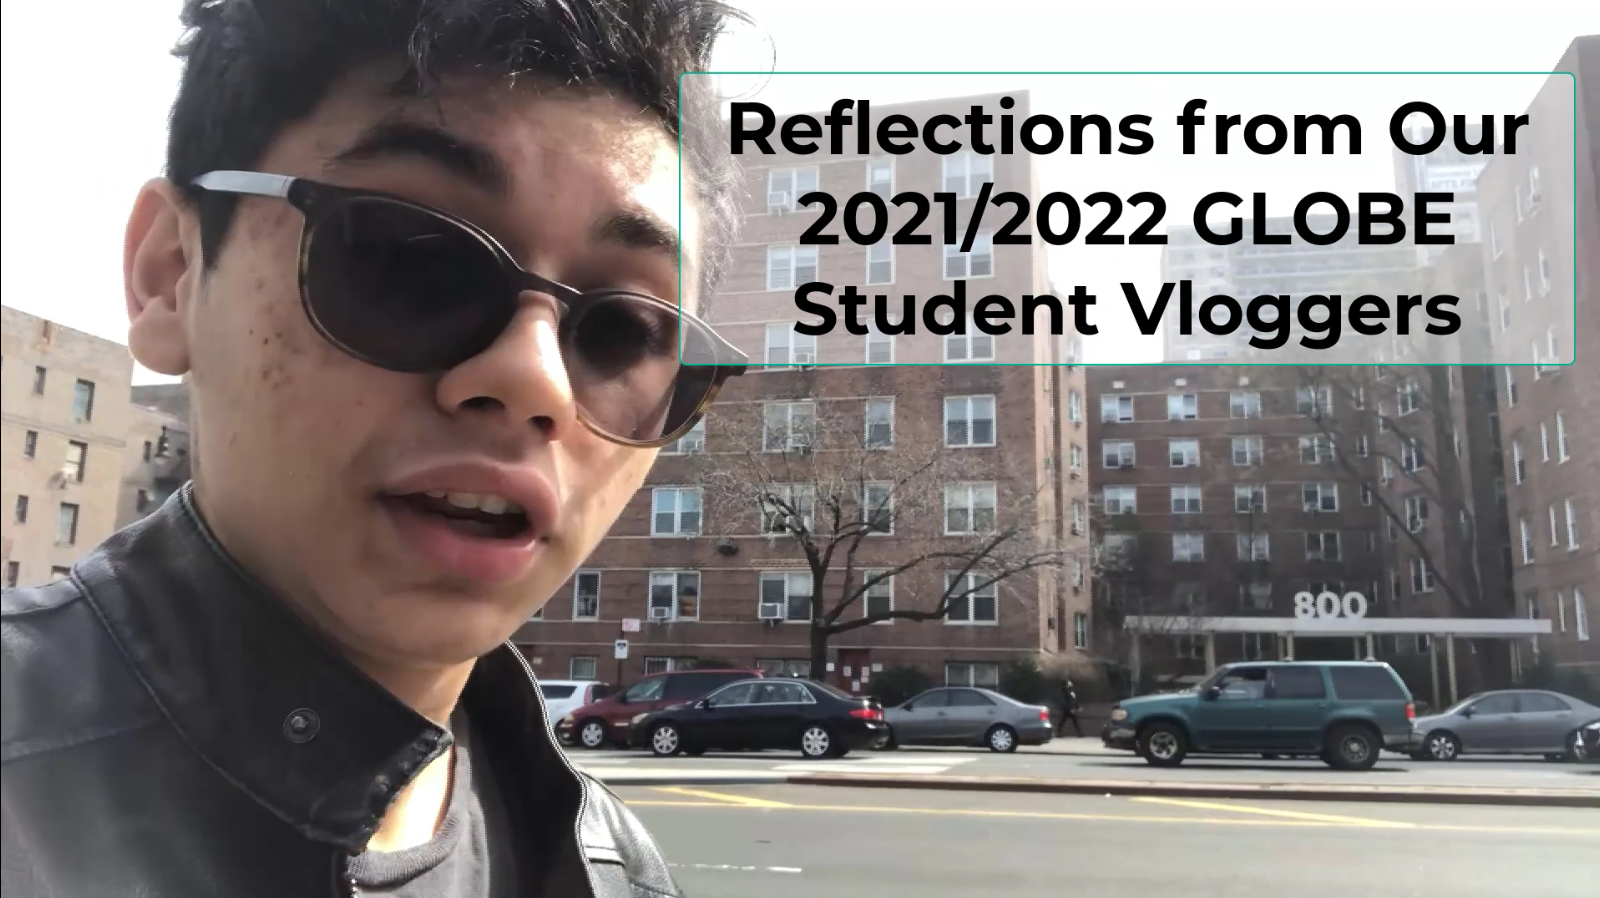 screen shot from a vlog created by the 2021/2022 GLOBE Student Vloggers